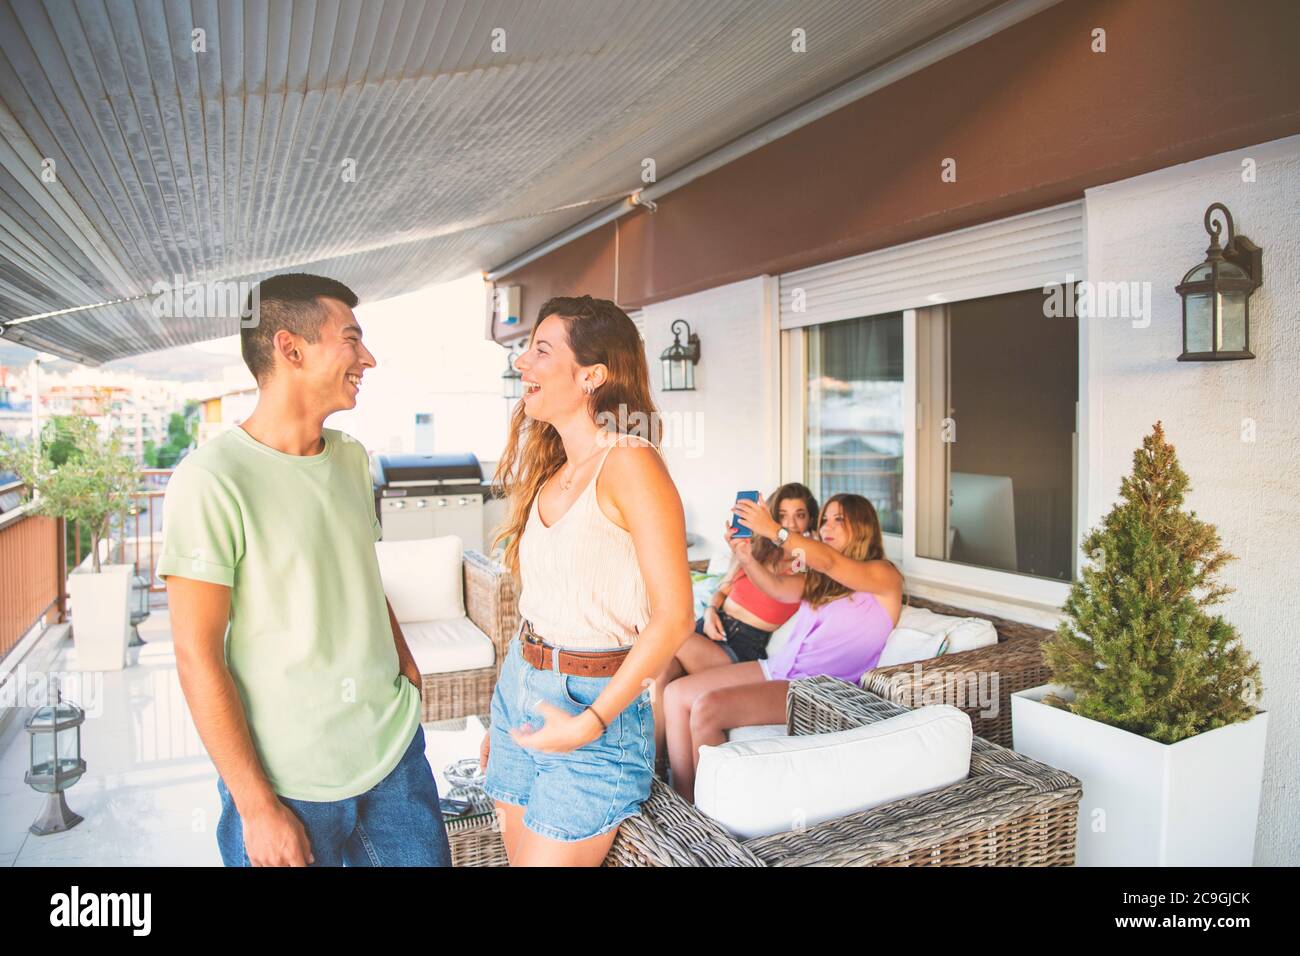 Happy Young Friends Talking and Laughing Outdoors on a Balcony. Concept with Friends Having Fun on a Balcony Stock Photo